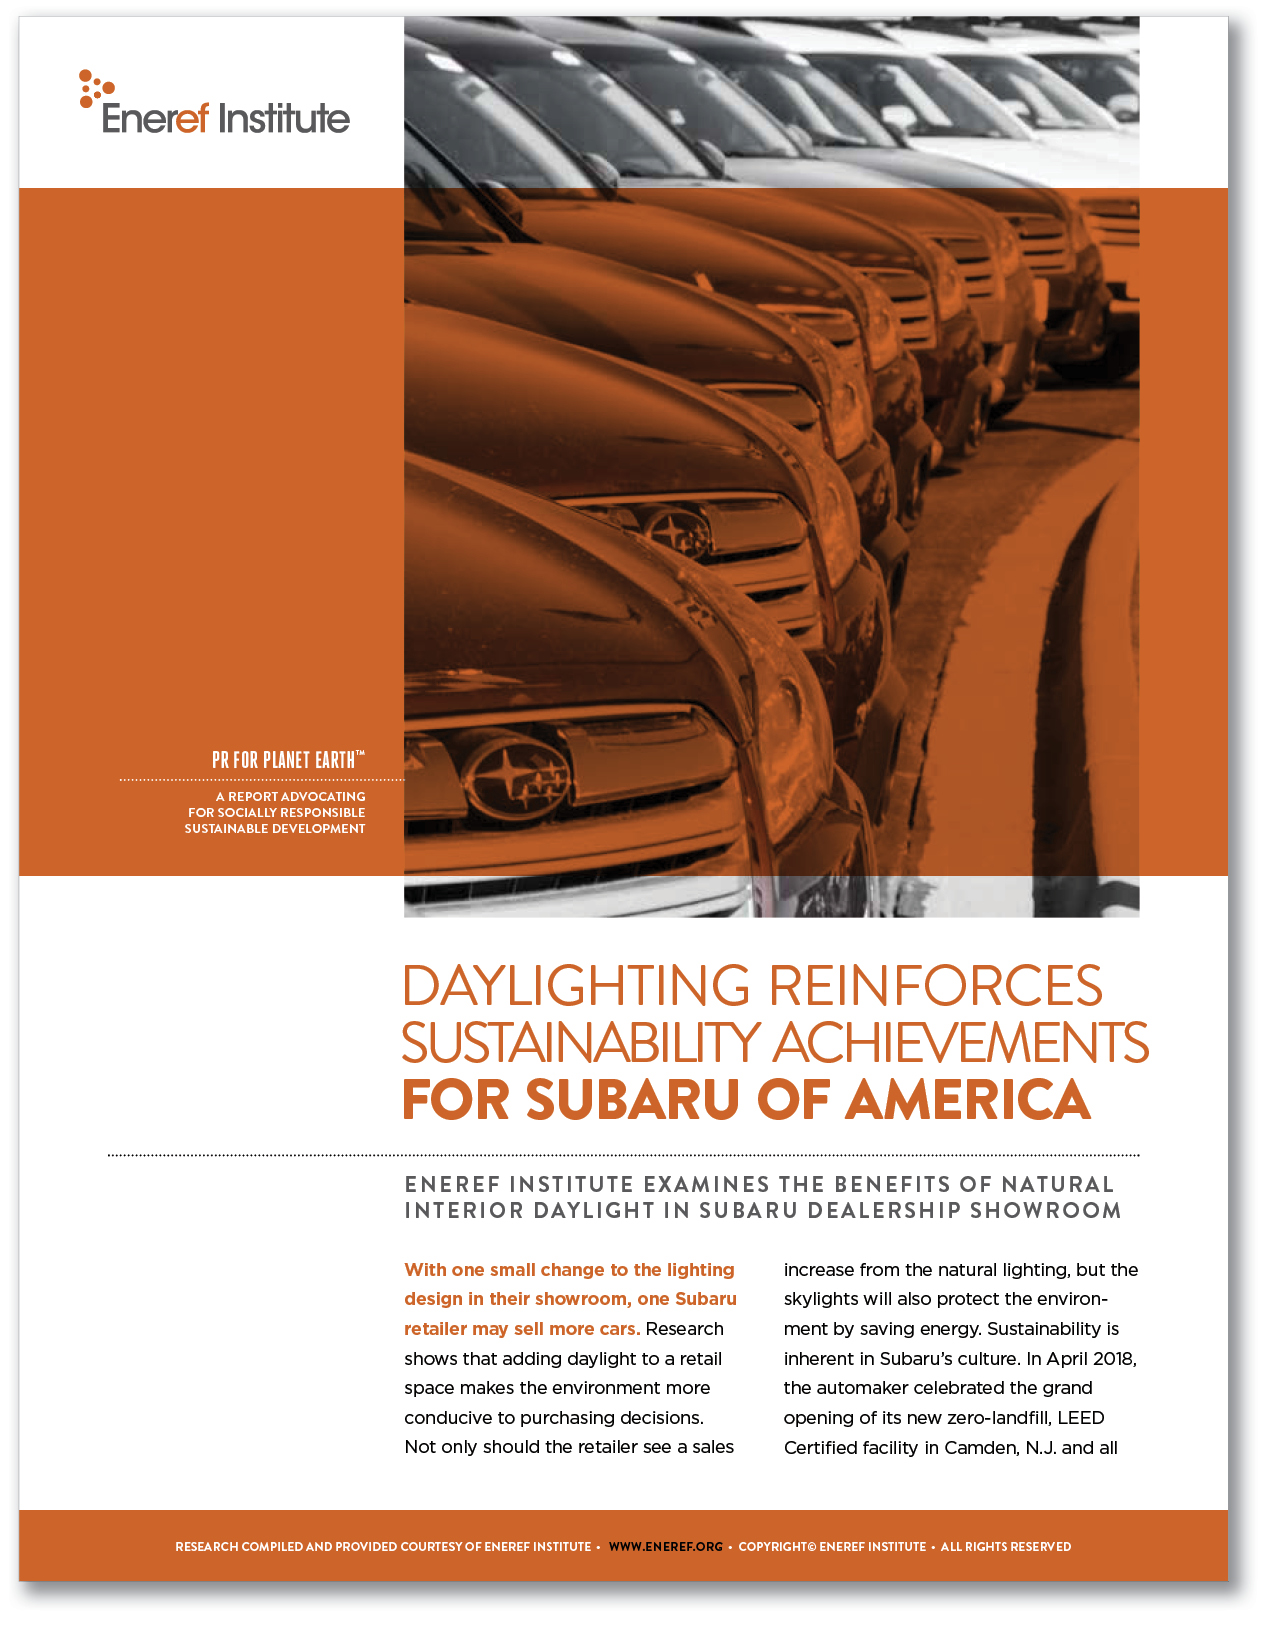 daylighting reinforces sustainability achievements for subaru of